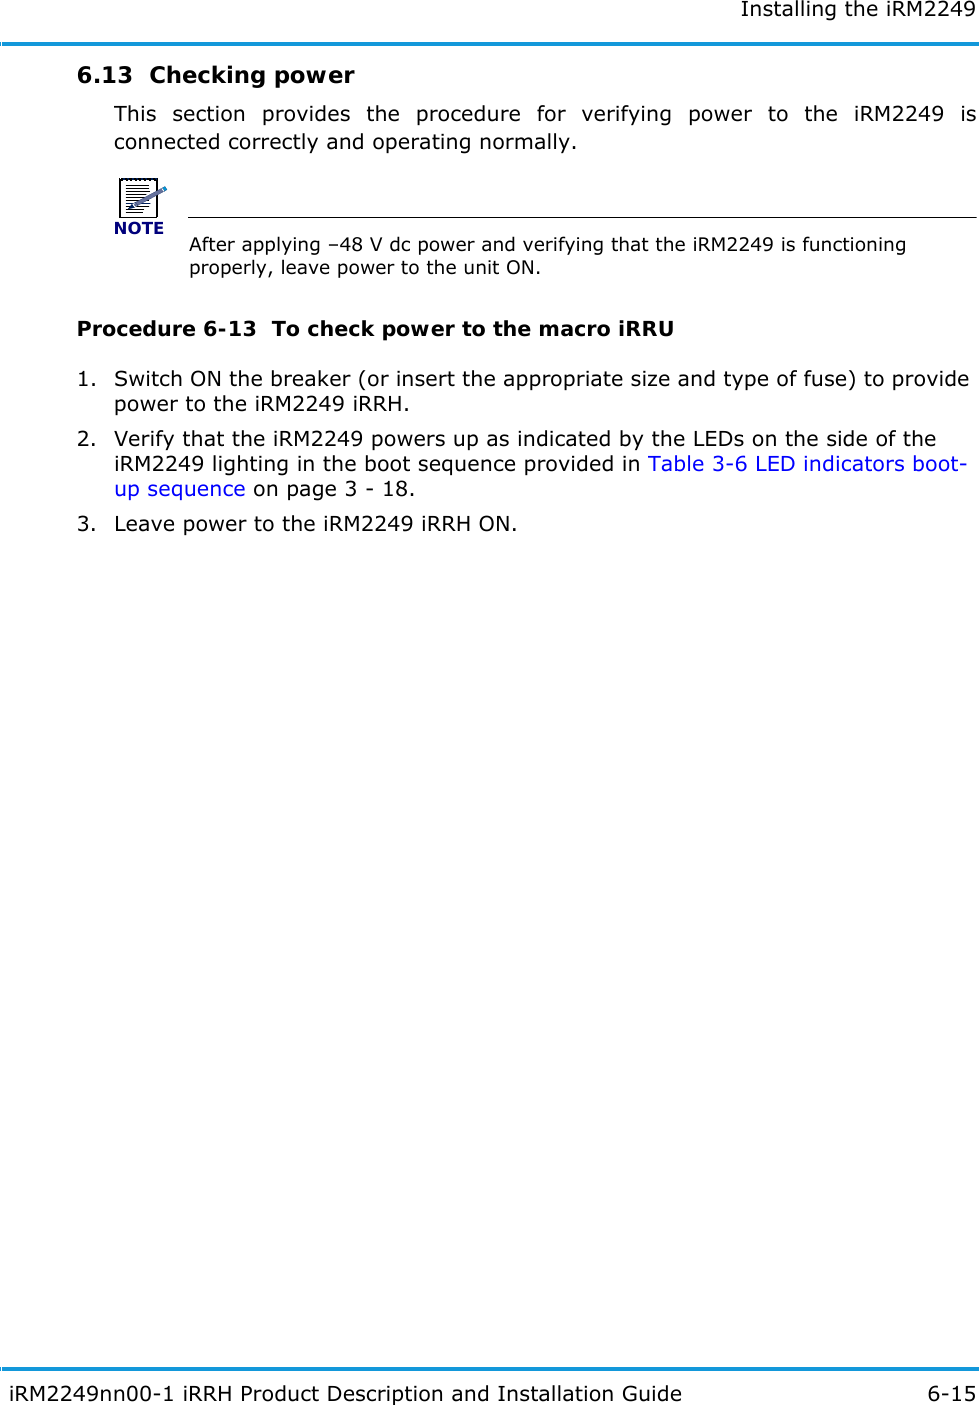 Installing the iRM2249 iRM2249nn00-1 iRRH Product Description and Installation Guide 6-156.13  Checking powerThis section provides the procedure for verifying power to the iRM2249 is connected correctly and operating normally.NOTEAfter applying –48 V dc power and verifying that the iRM2249 is functioning properly, leave power to the unit ON.Procedure 6-13  To check power to the macro iRRU1. Switch ON the breaker (or insert the appropriate size and type of fuse) to provide power to the iRM2249 iRRH.2. Verify that the iRM2249 powers up as indicated by the LEDs on the side of the iRM2249 lighting in the boot sequence provided in Table 3-6 LED indicators boot-up sequence on page 3 - 18.3. Leave power to the iRM2249 iRRH ON.